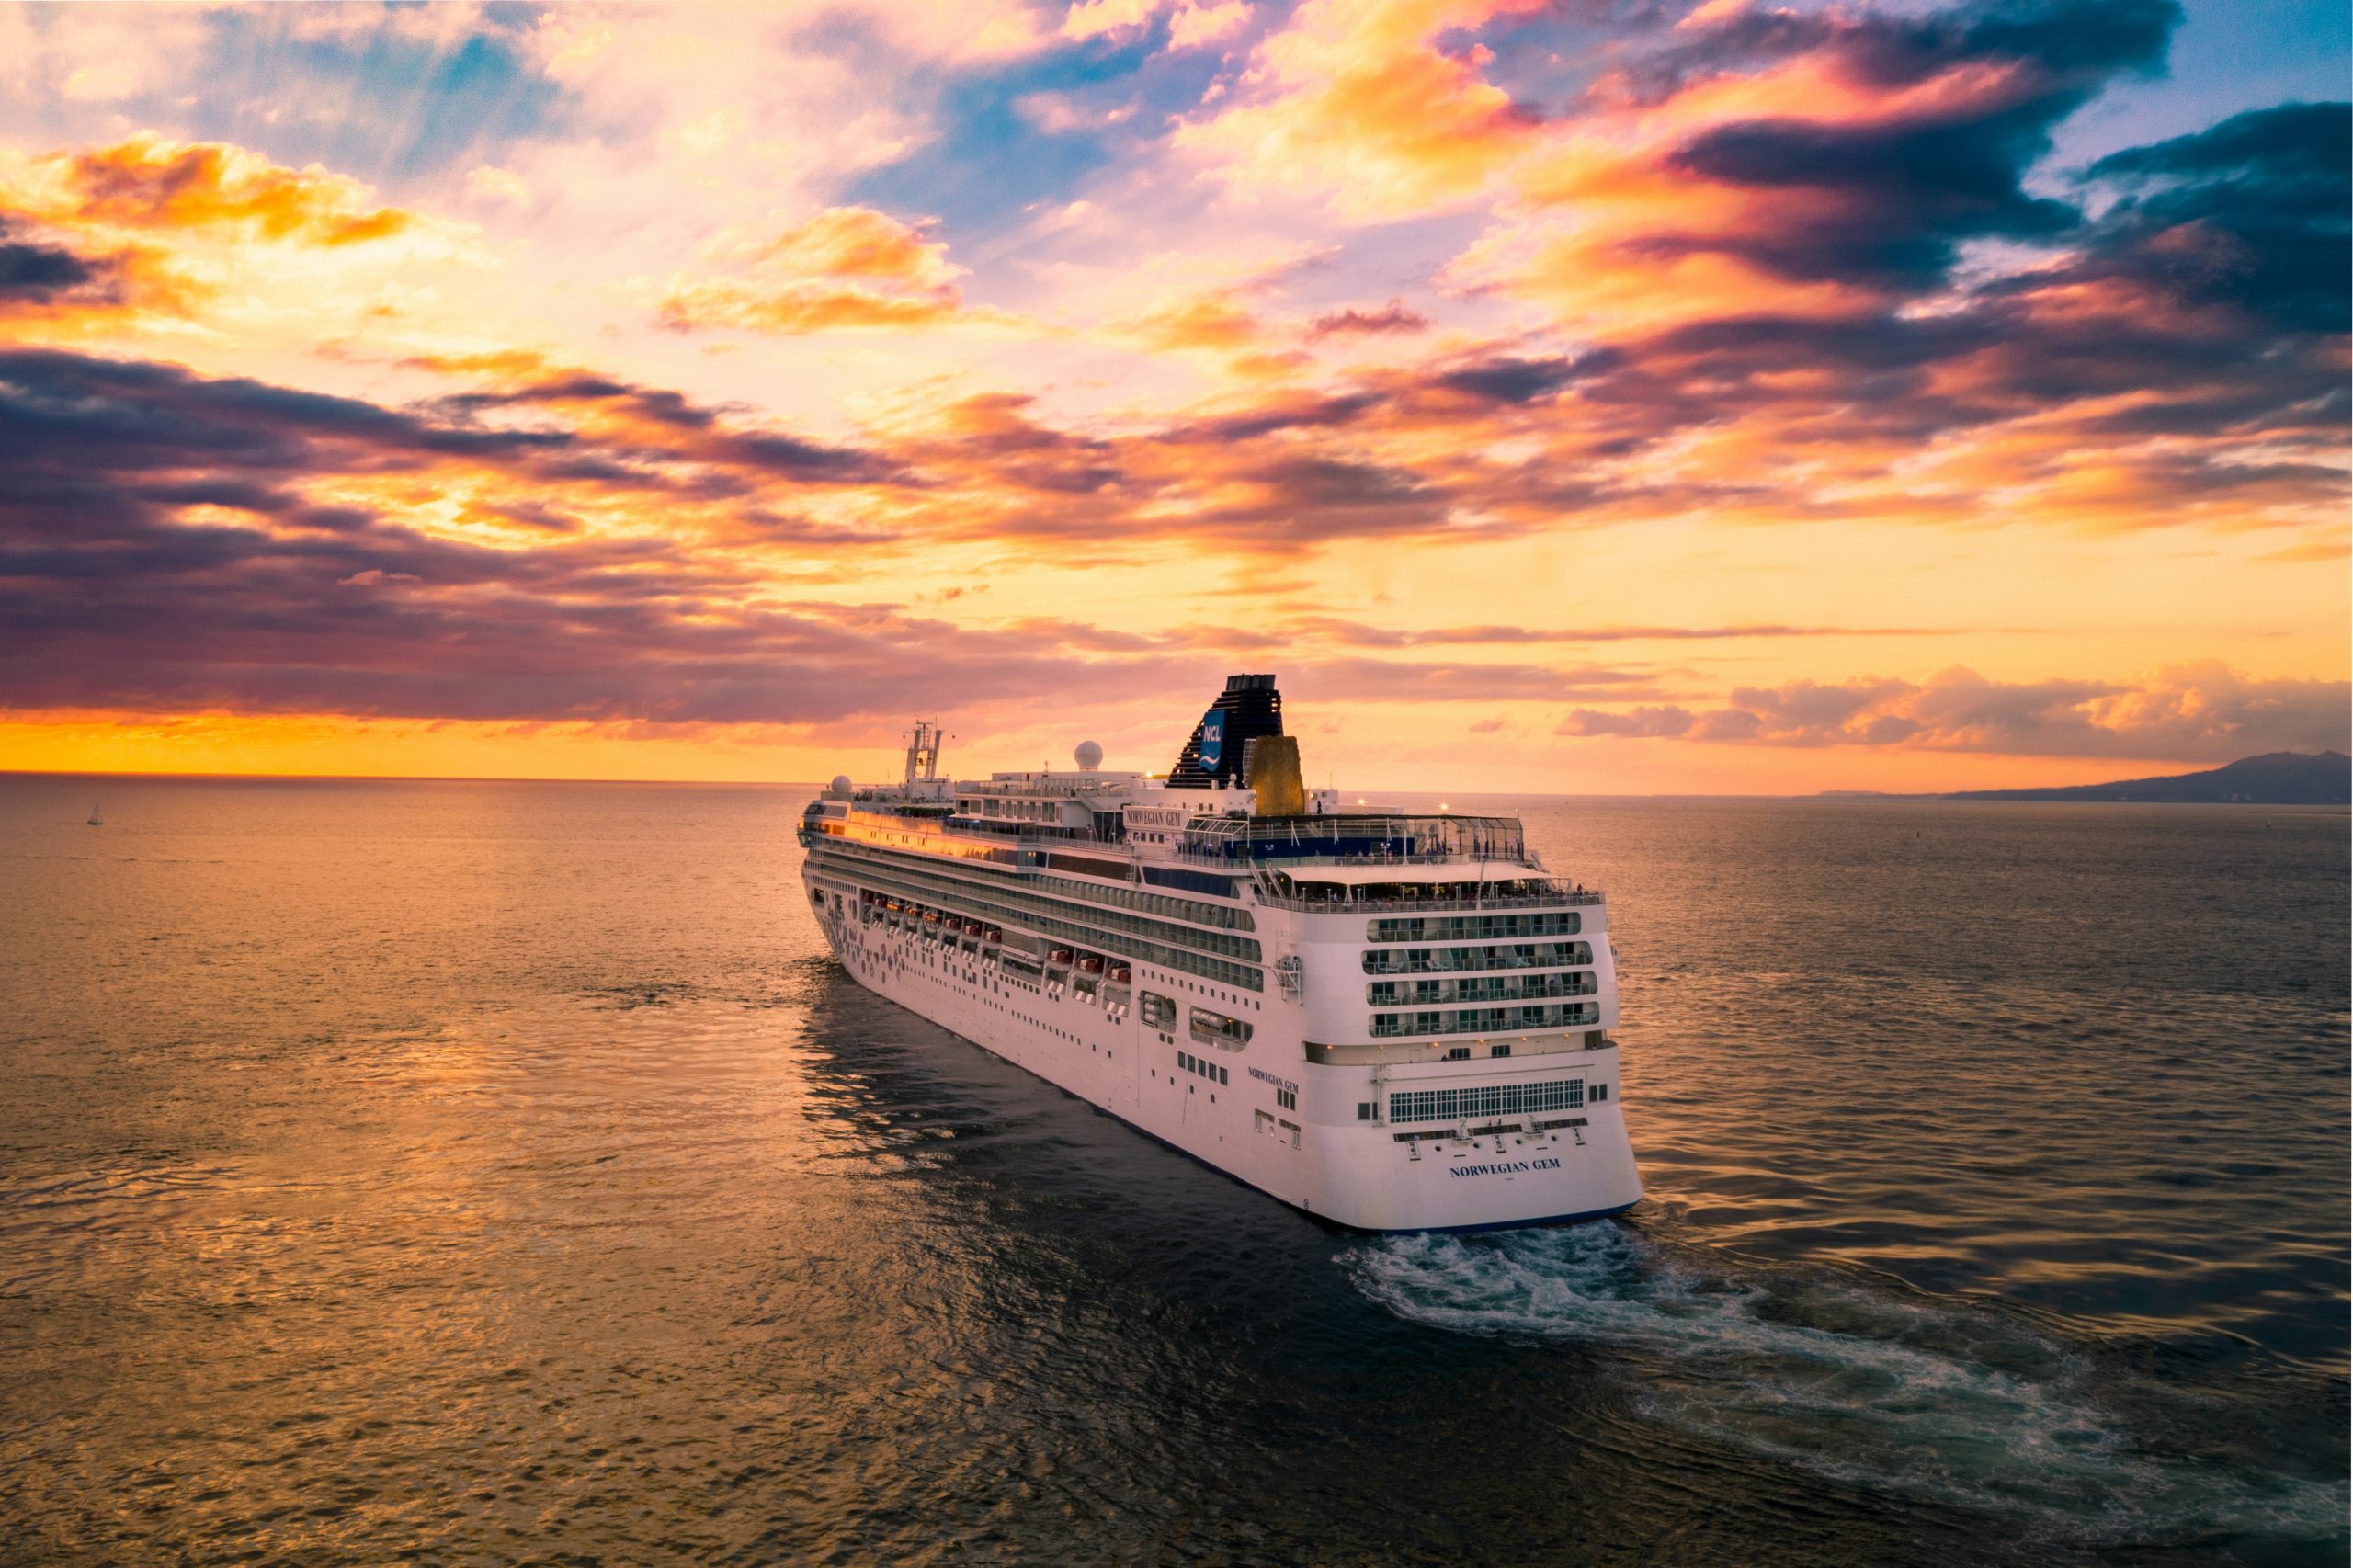 discover the ultimate adventure with our thrilling cruise experiences. explore the world's most breathtaking destinations and create unforgettable memories on a luxurious cruise escape.